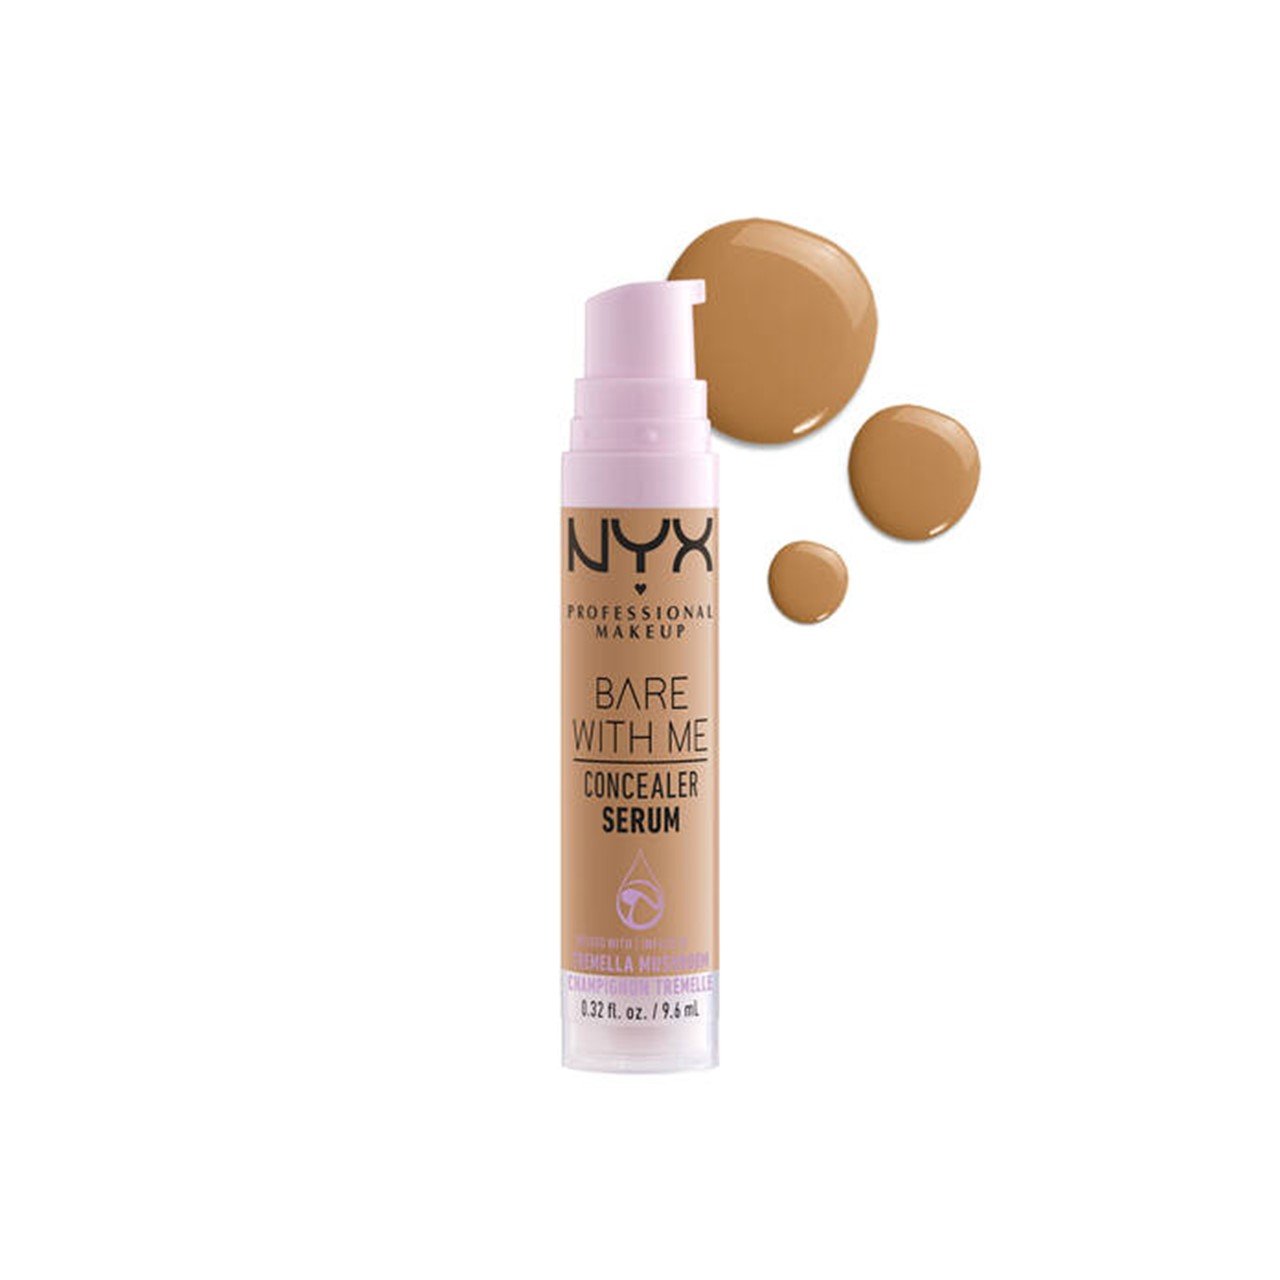 NYX Pro Makeup Bare With Me Concealer Serum 08 Sand 9.6ml